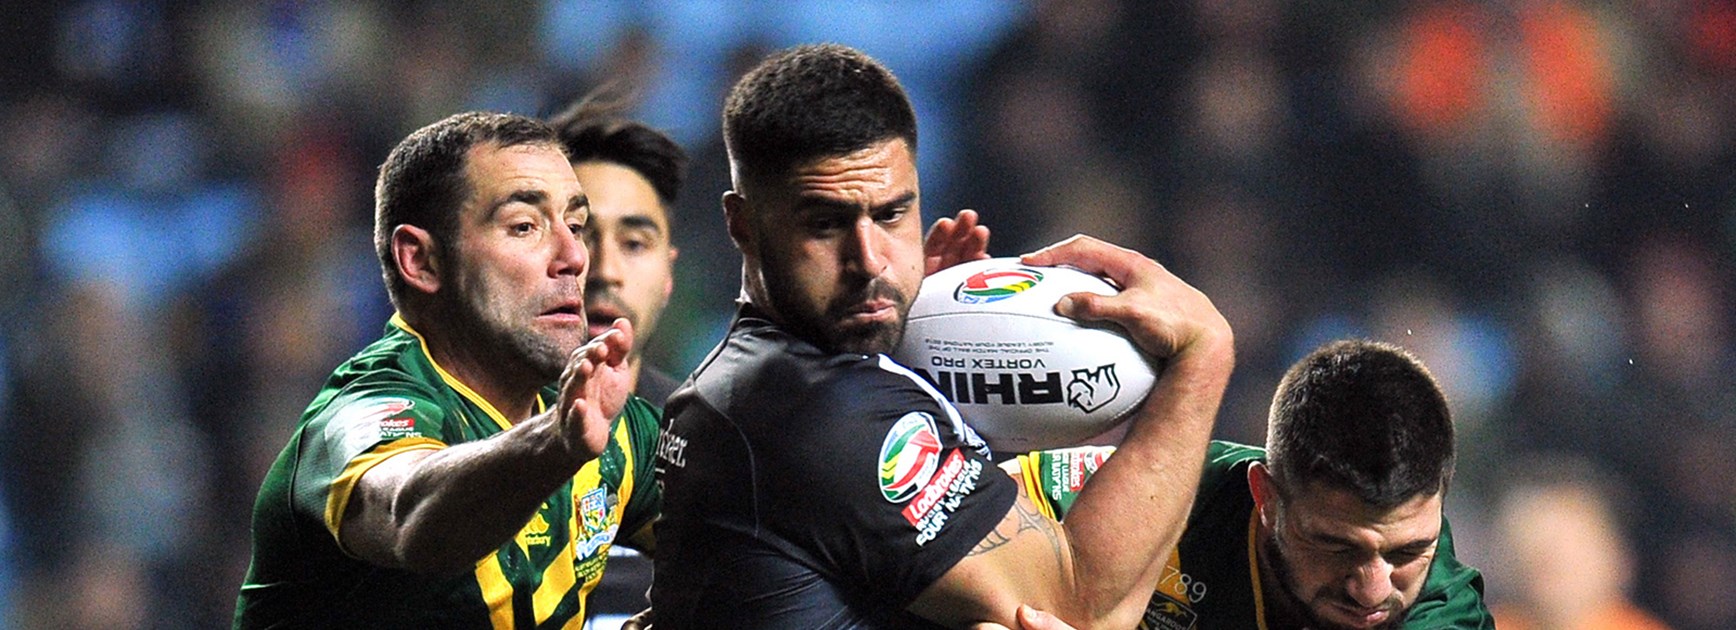 Kiwis captain Jesse Bromwich in action against the Kangaroos in the Four Nations in Coventry.